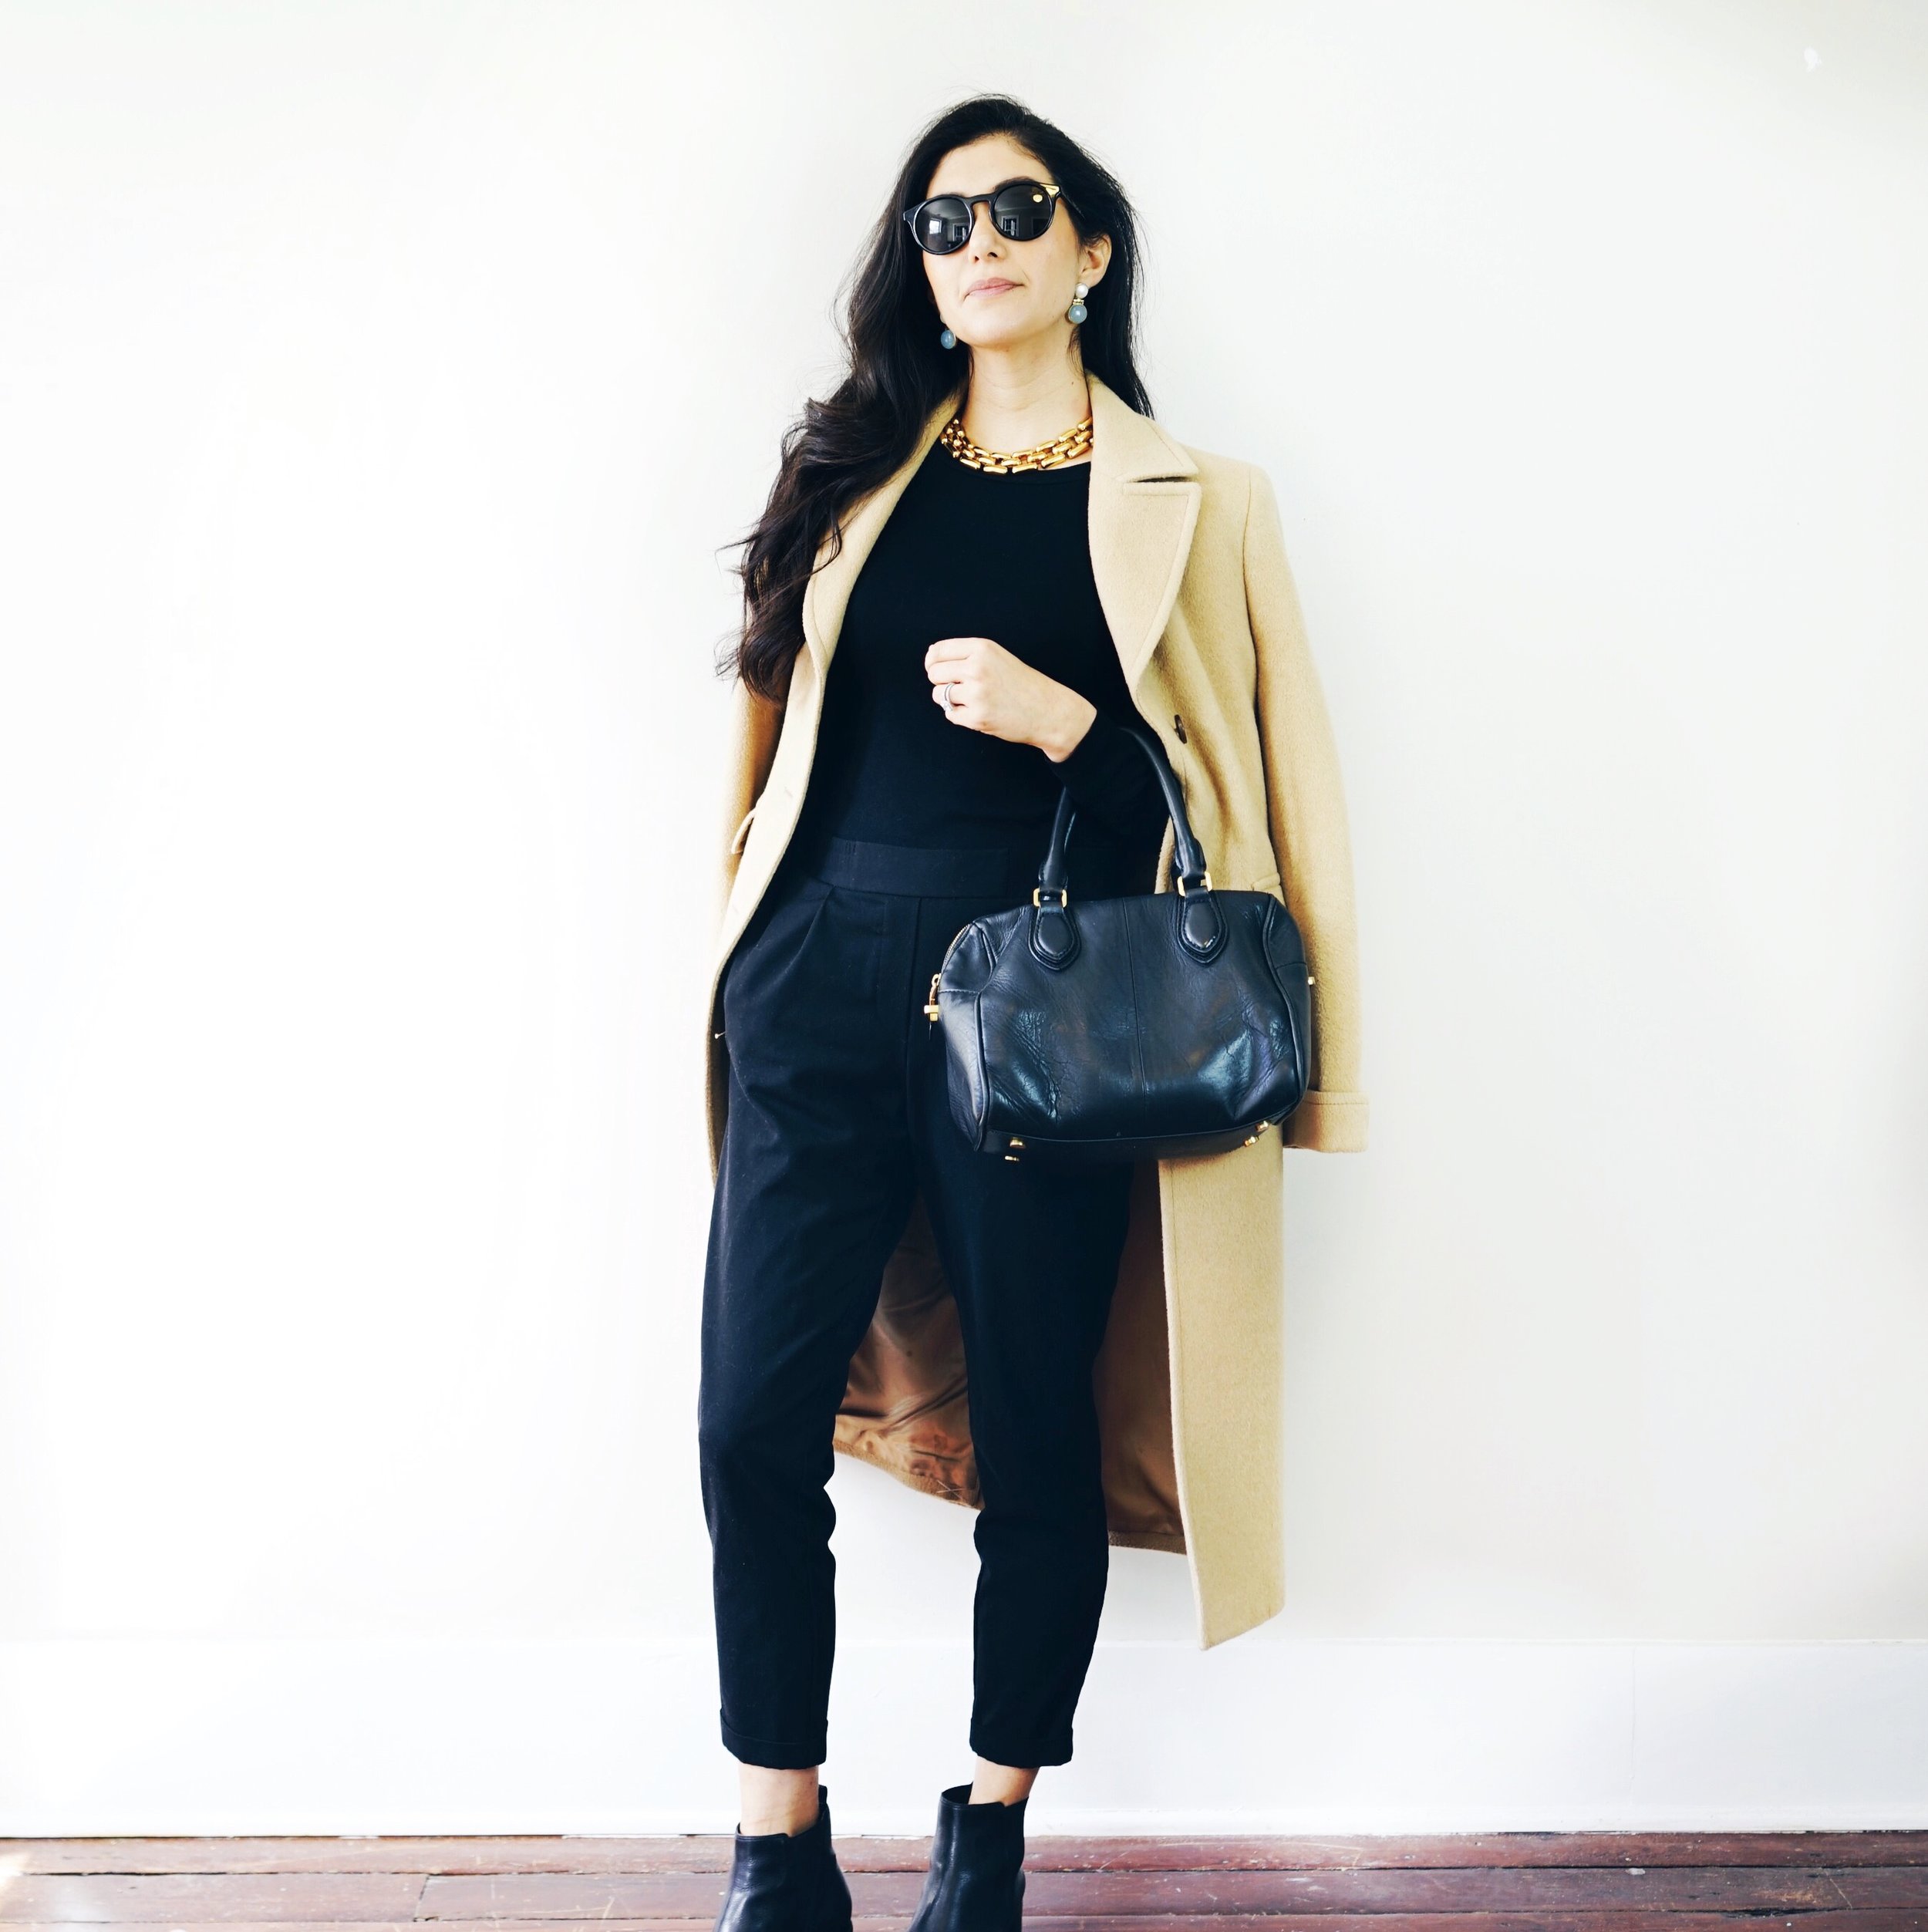 How To Style Black Pants 4 Ways: Project 1-4-4 - ABOUT How To